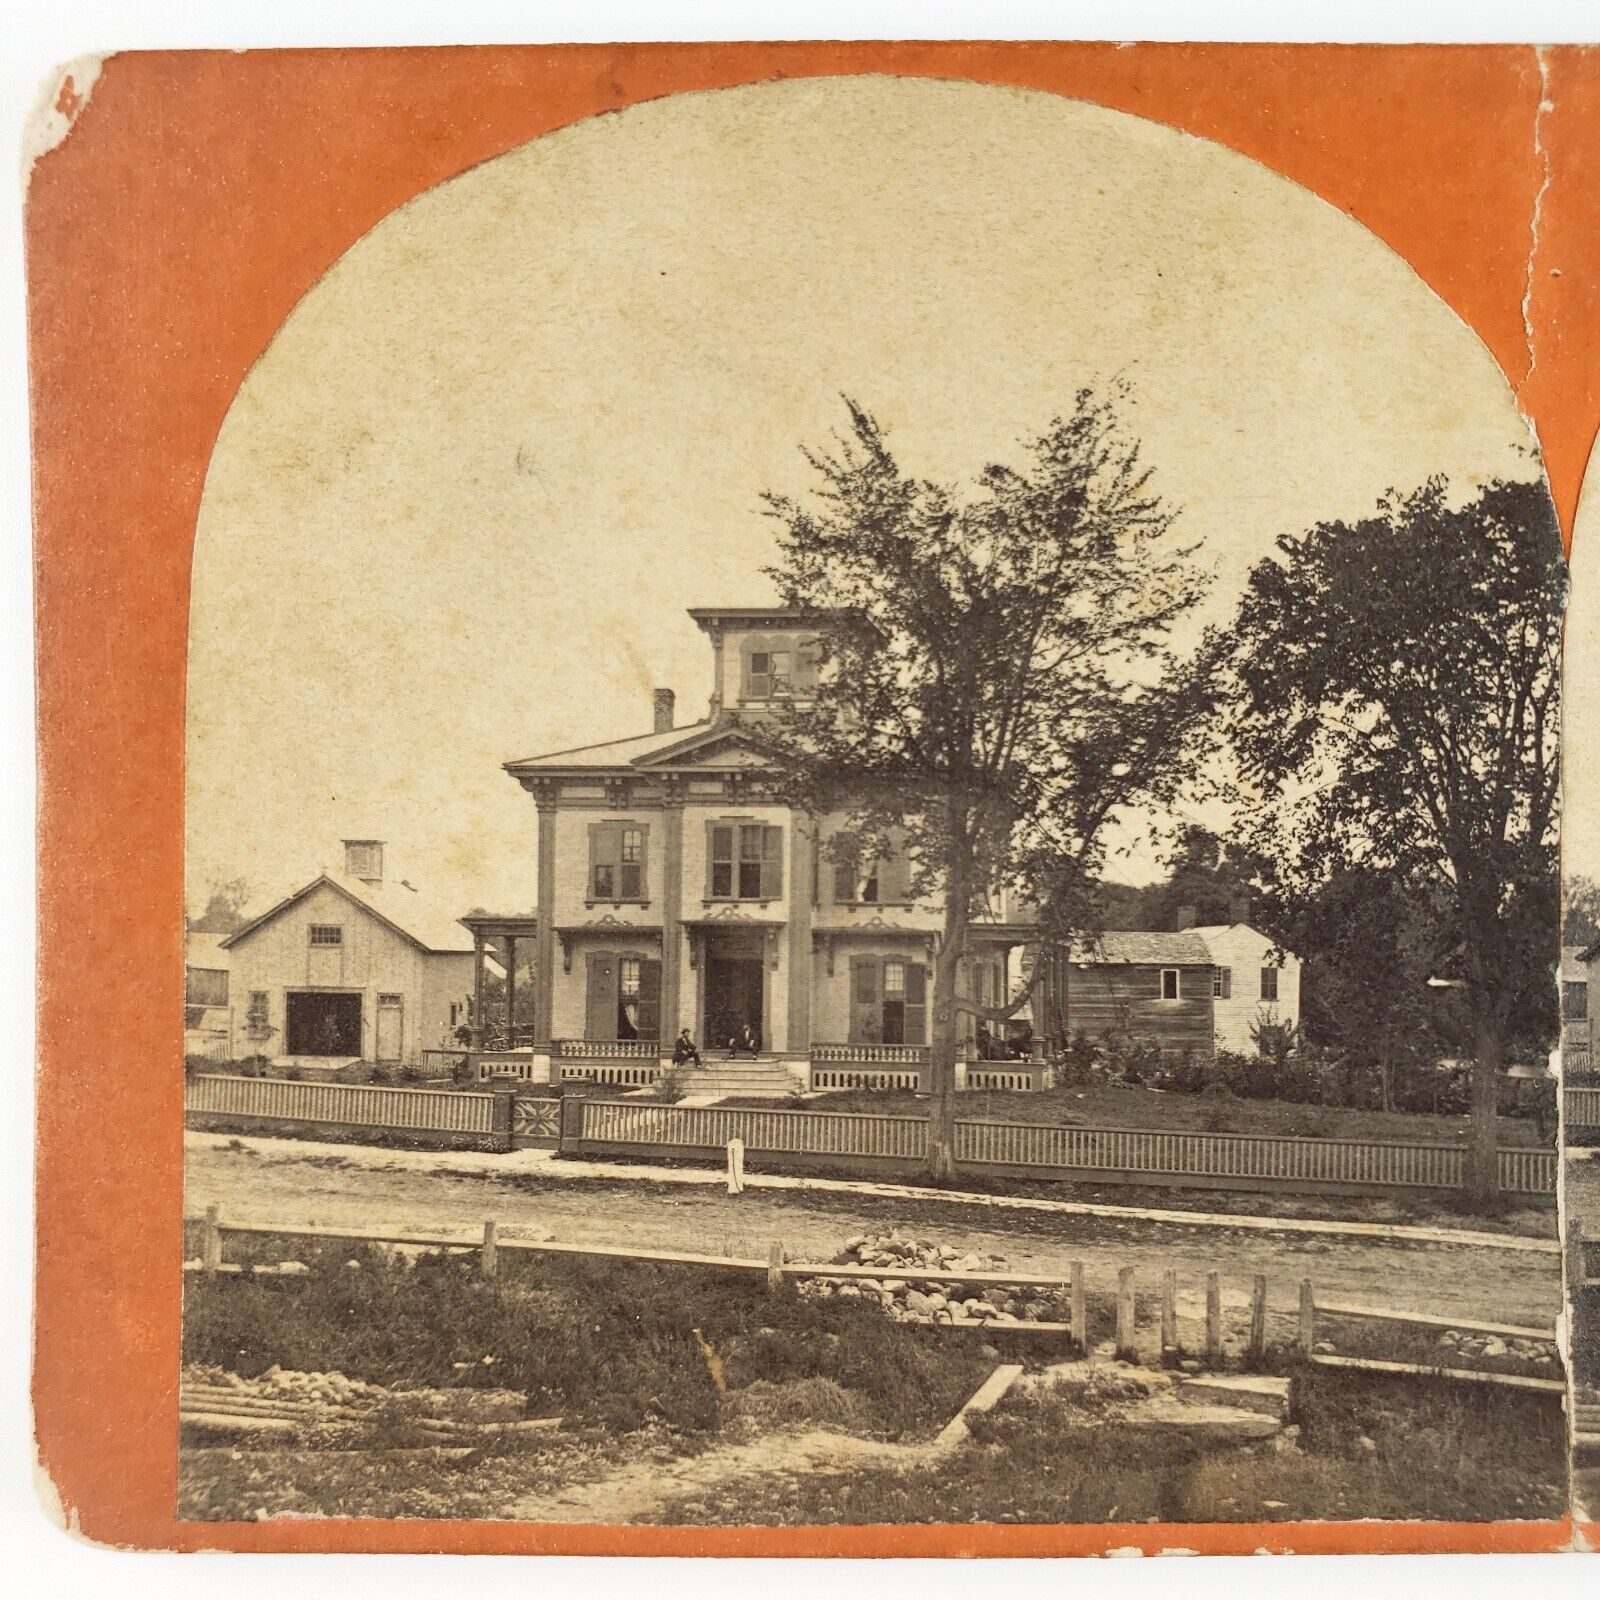 Kitchel House MIddlebury College Stereoview c1870 Academy Park Vermont B2232